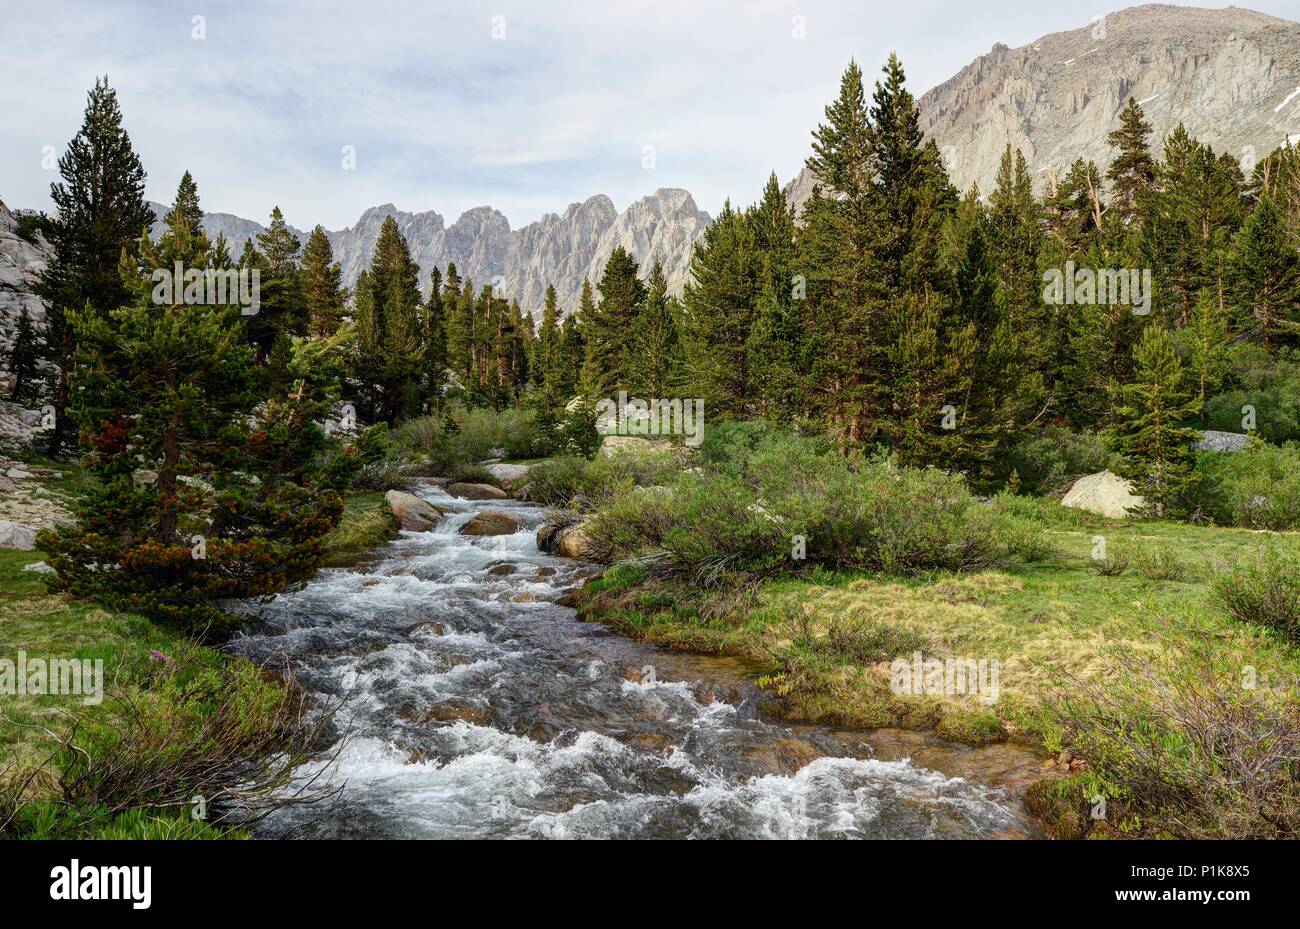 Rock Creek flowing Through the Miter Basin, Sequoia National Park, California, United States Stock Photo